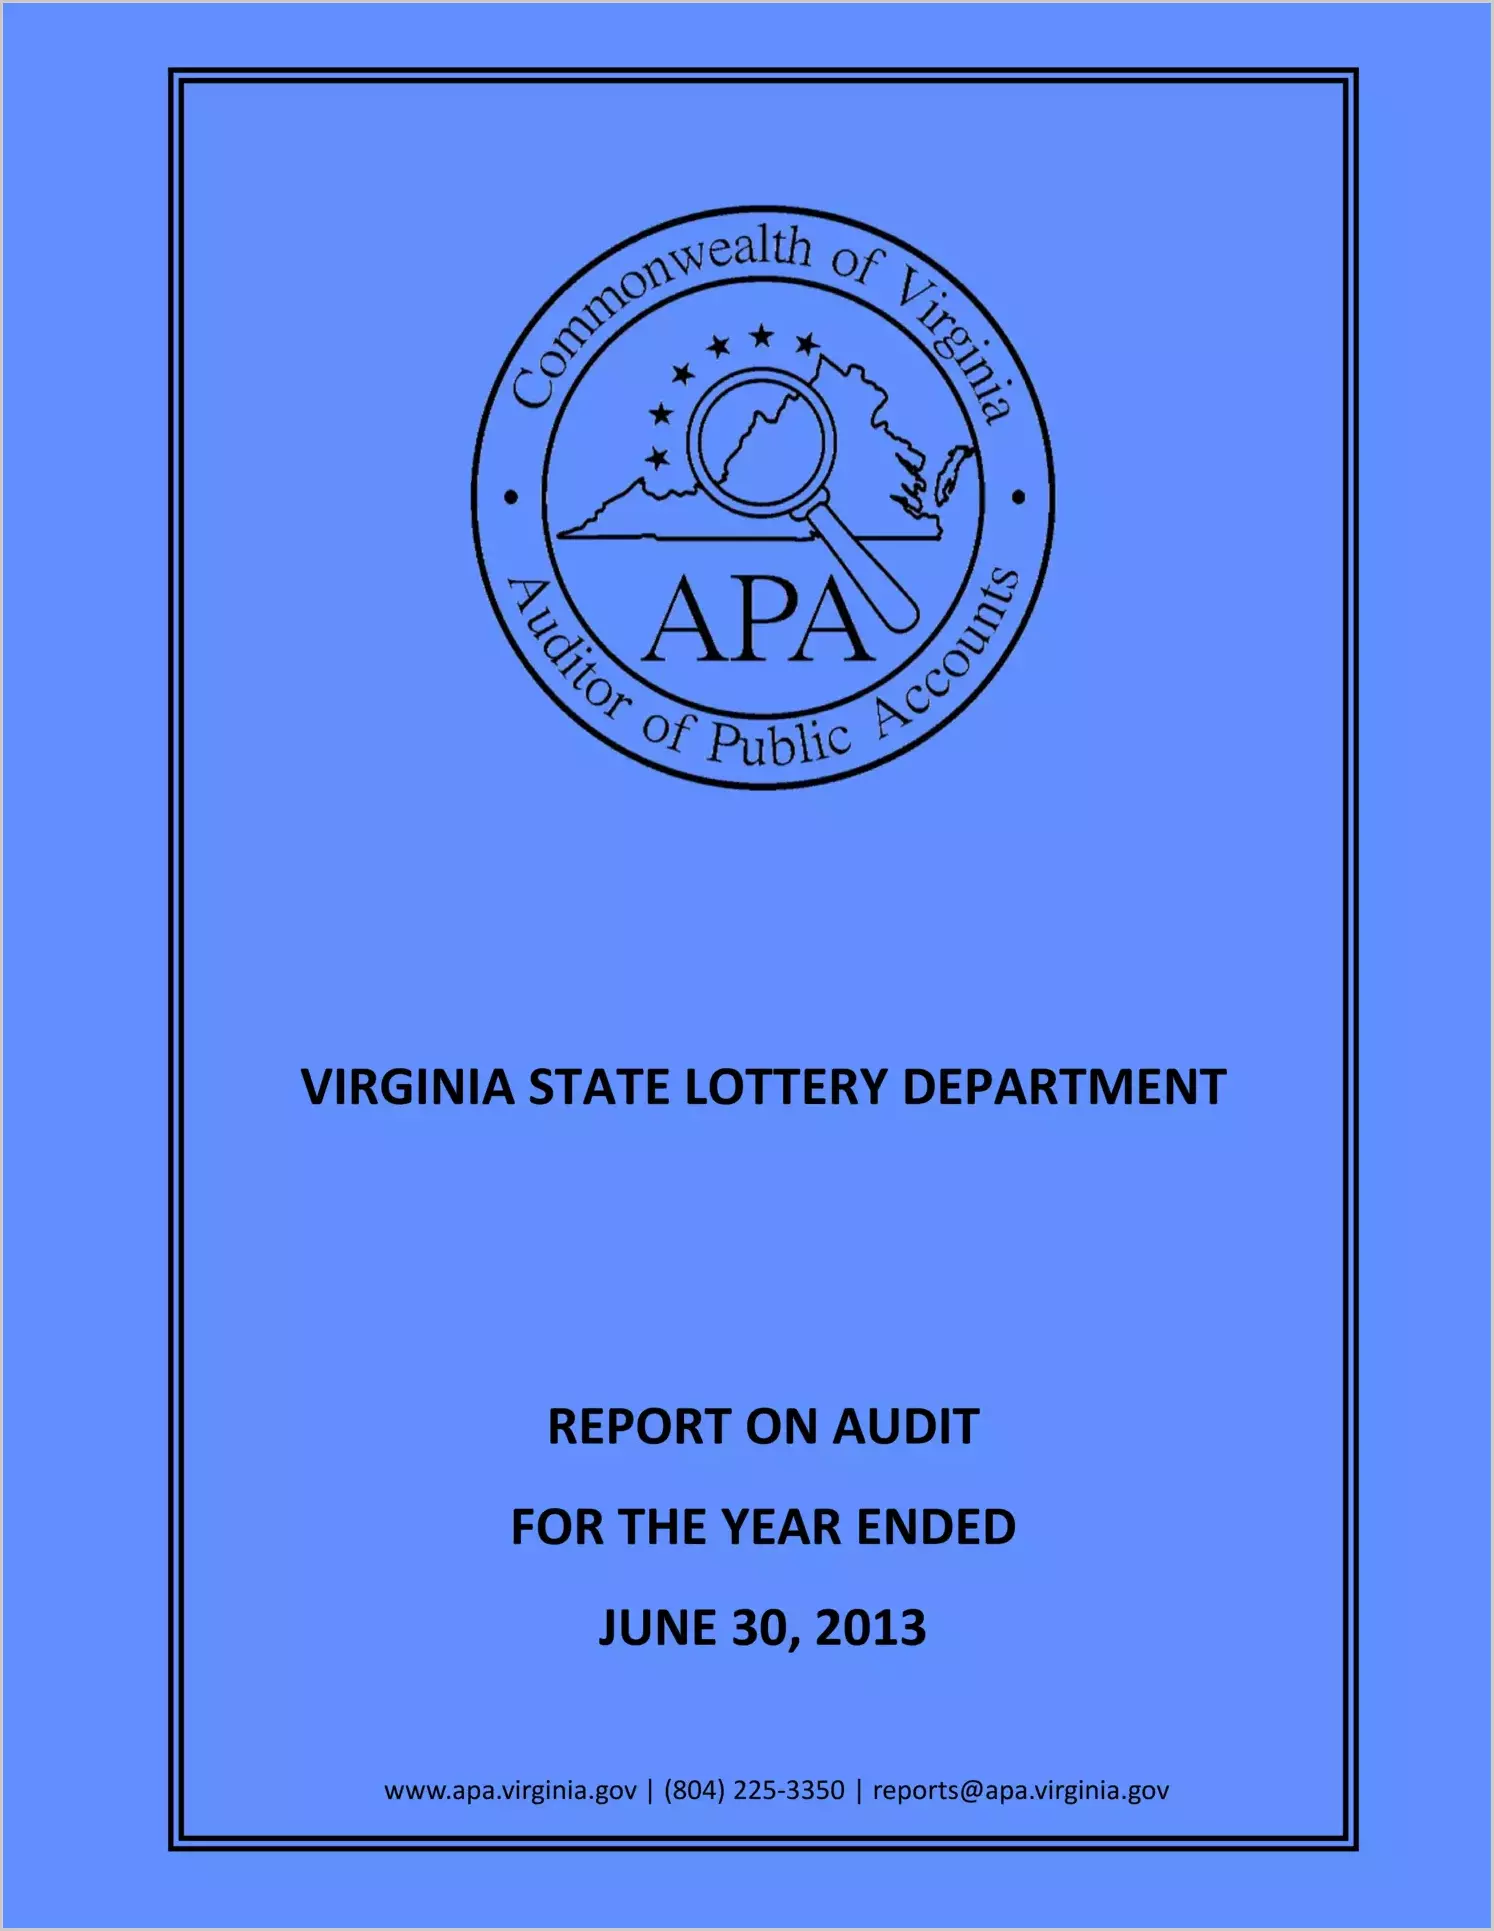 Virginia State Lottery Department for the year ended June 30, 2013